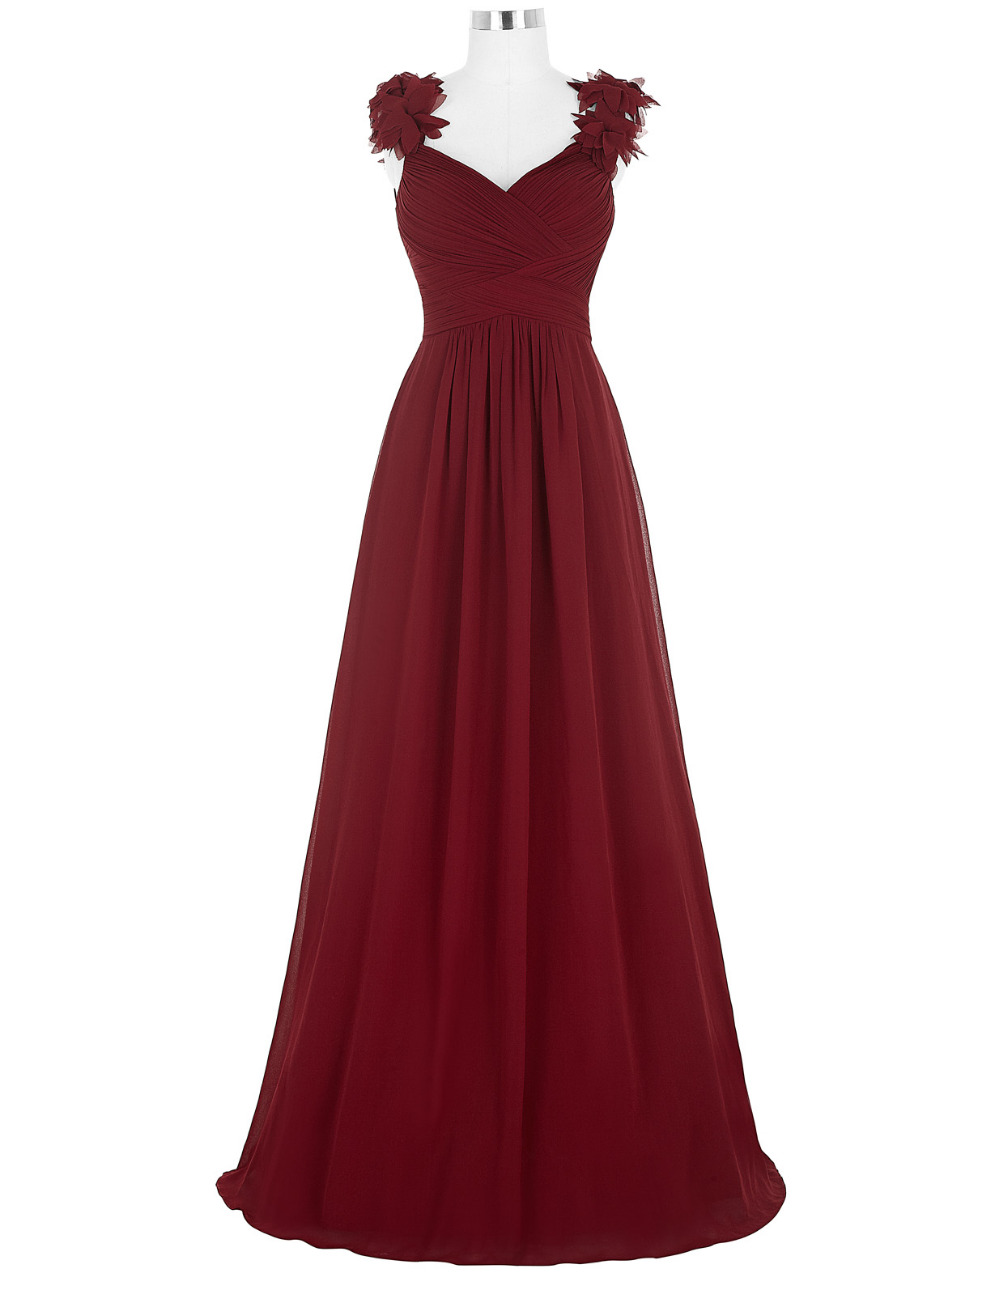 Long Evening Dress Sexy V Neck Ruched Padded Formal Wedding Party Dress Burgundy Evening Gowns